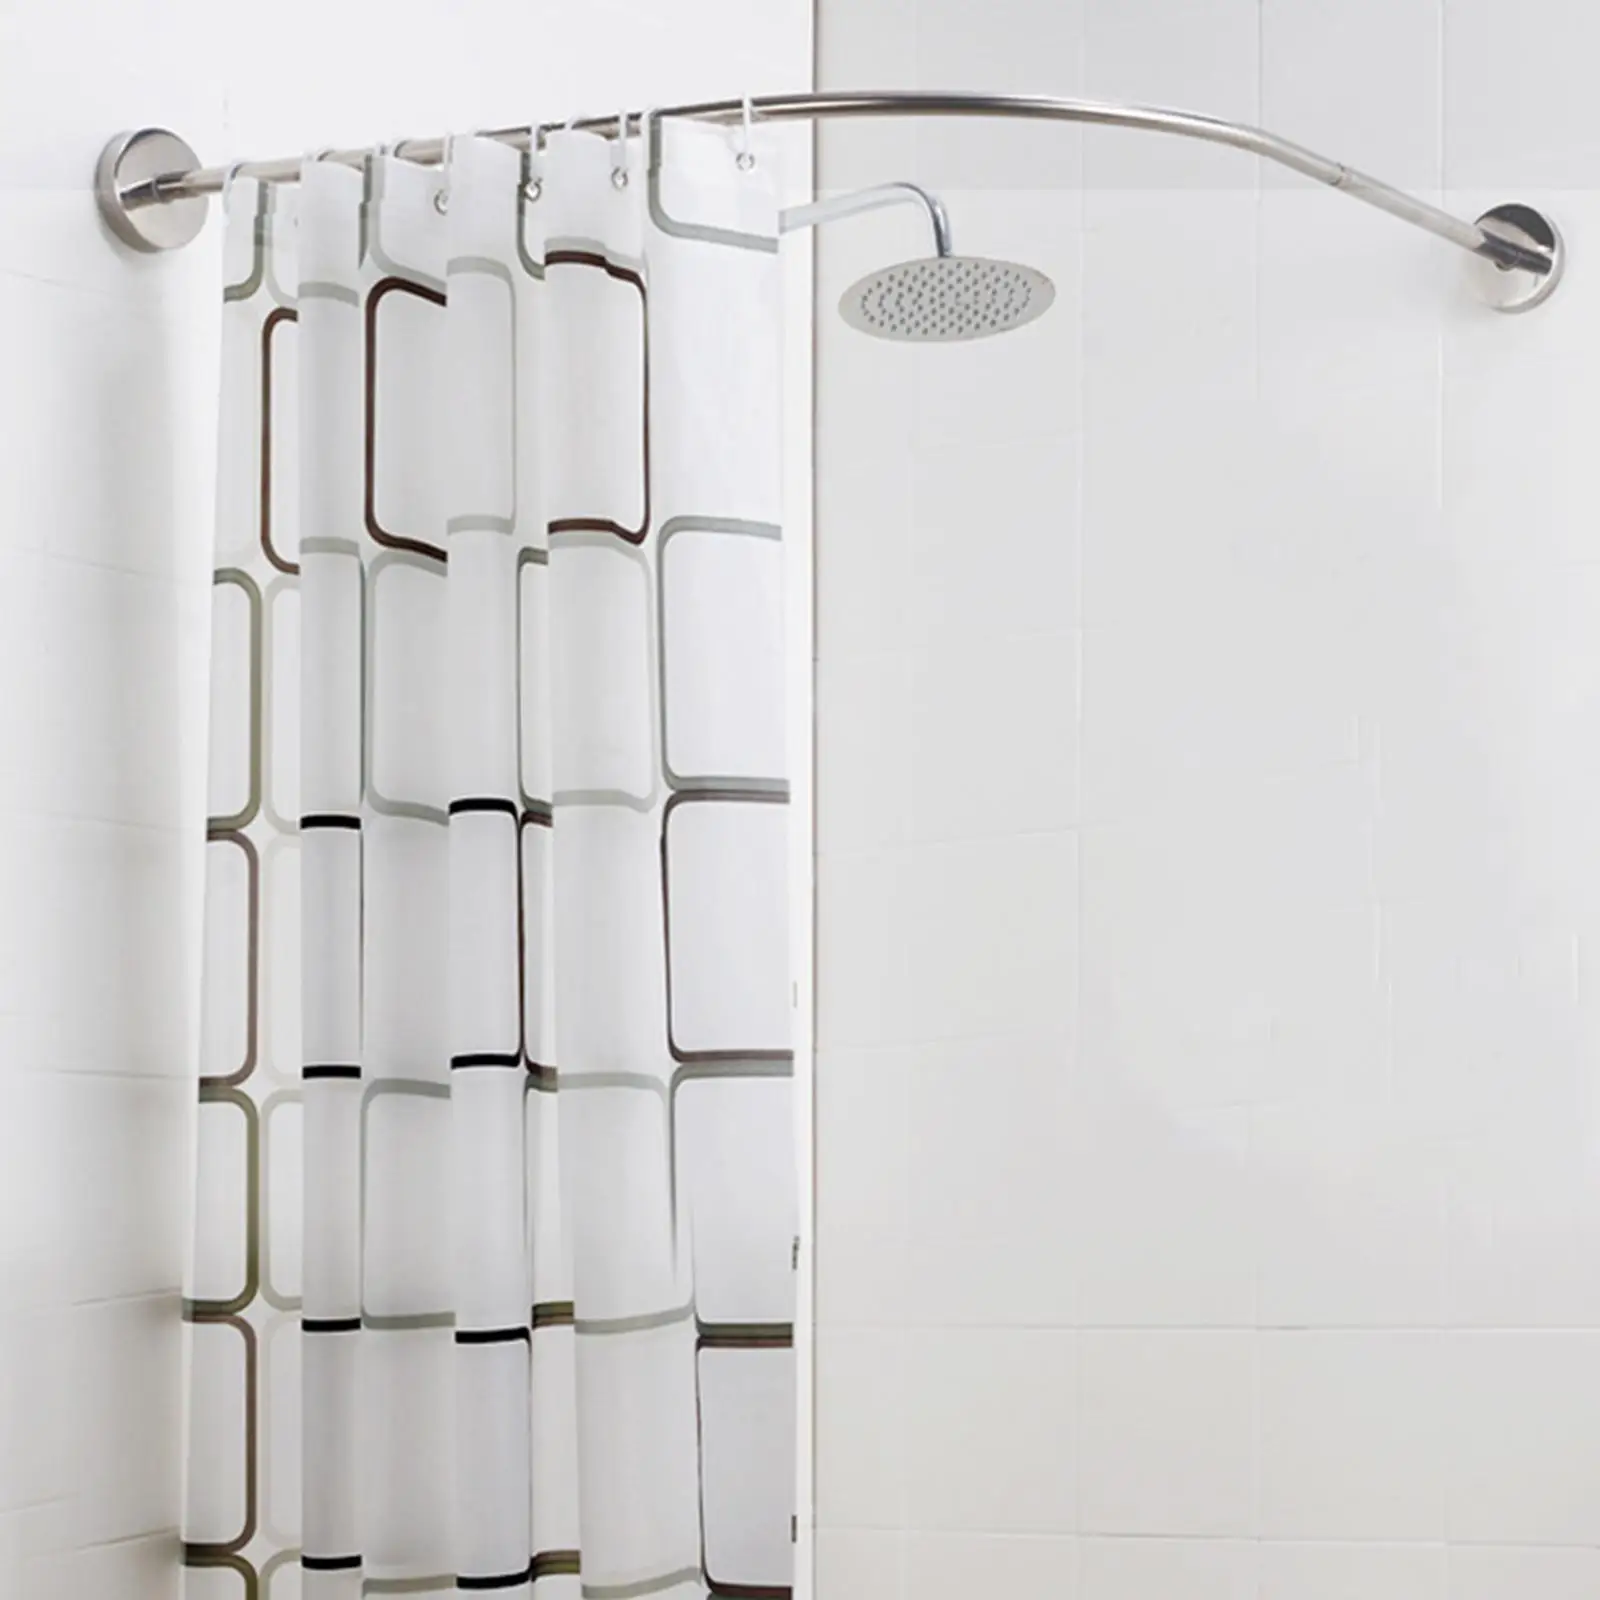 Telescoping Curved Shower Rod Closet Rod Clothes Drying Rack Adjustable Curved Shower Curtain Rod for Cloakrooms Home Bathroom